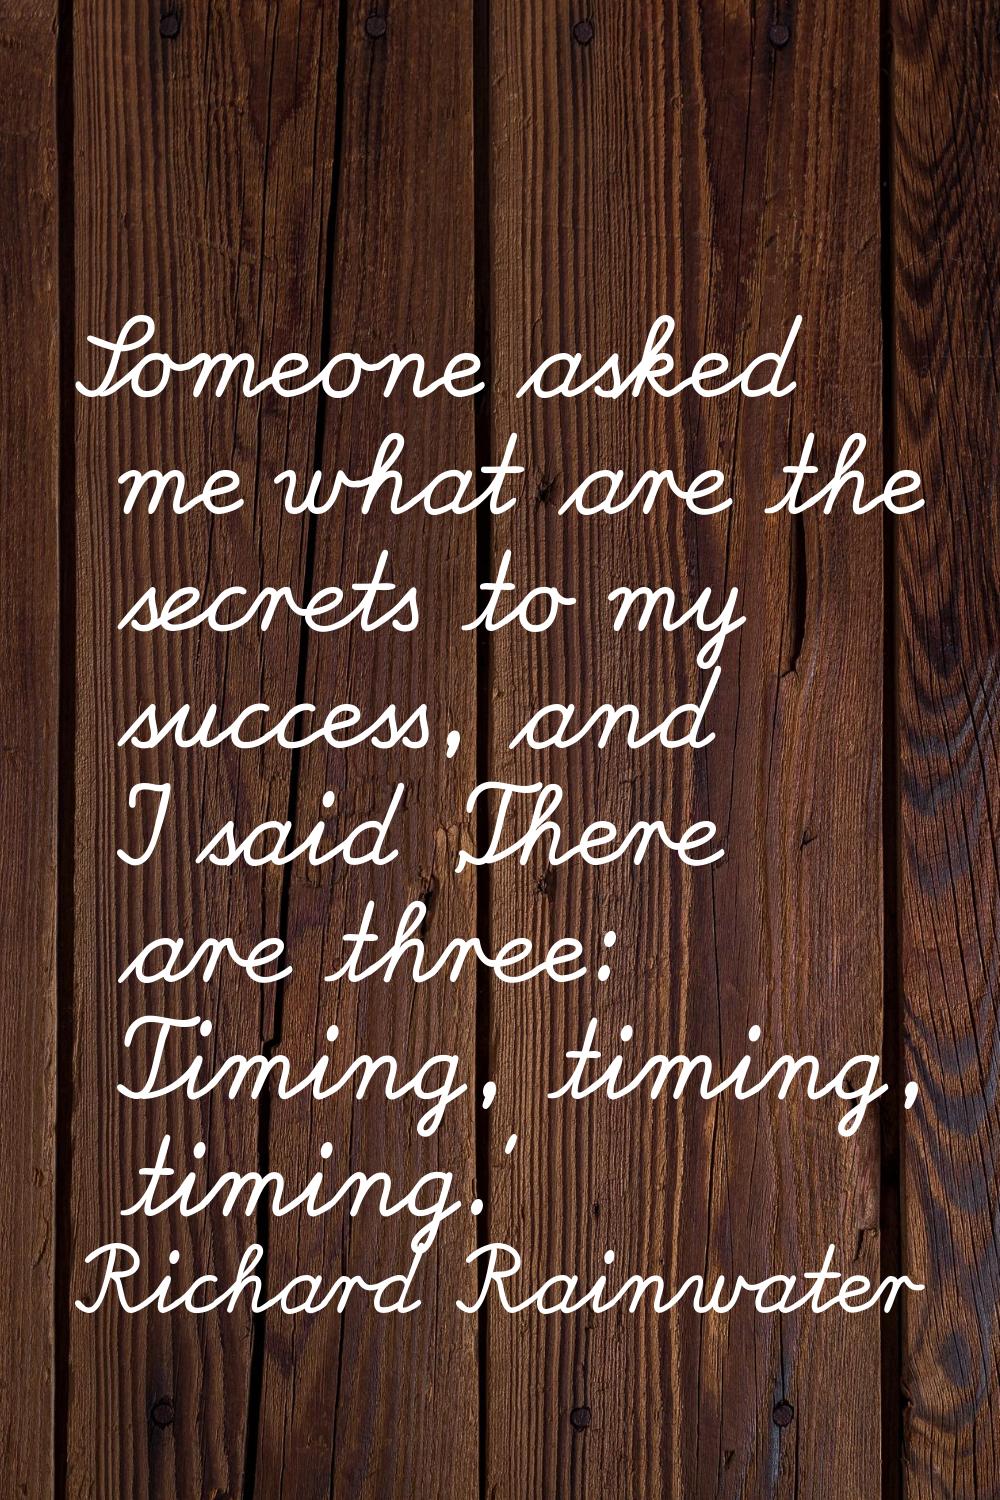 Someone asked me what are the secrets to my success, and I said 'There are three: Timing, timing, t